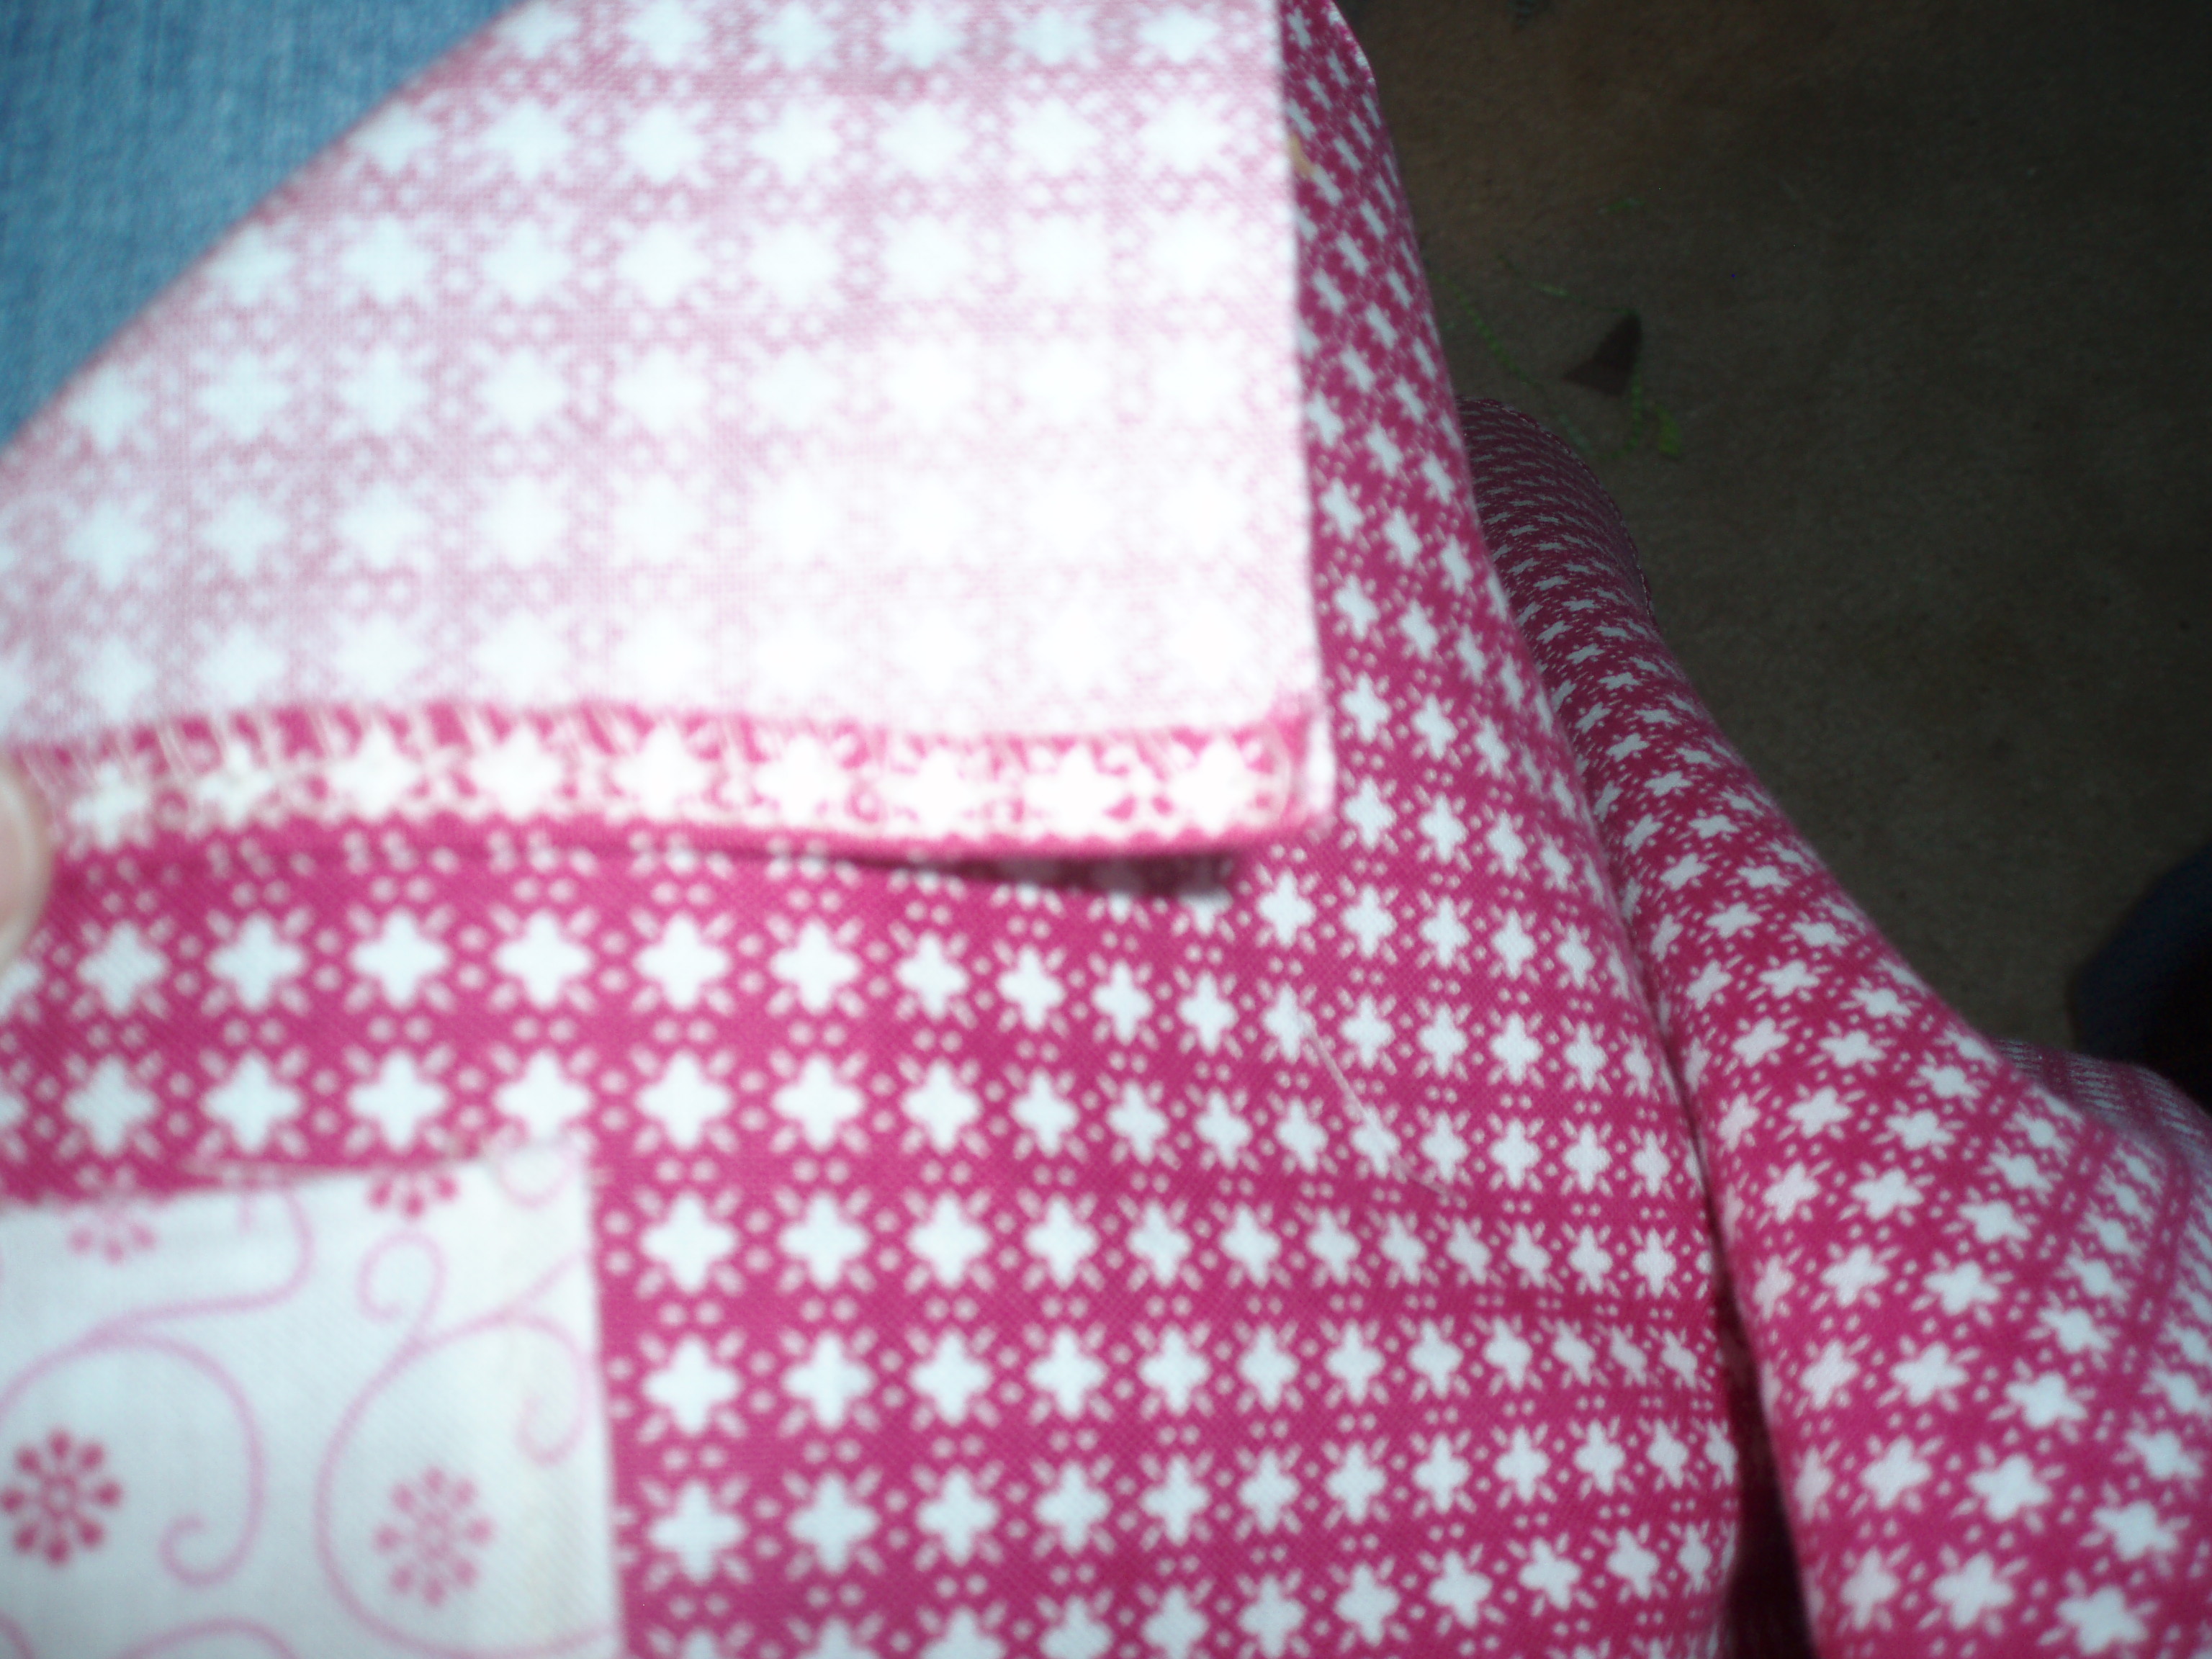 Picture of finished edge of the half apron